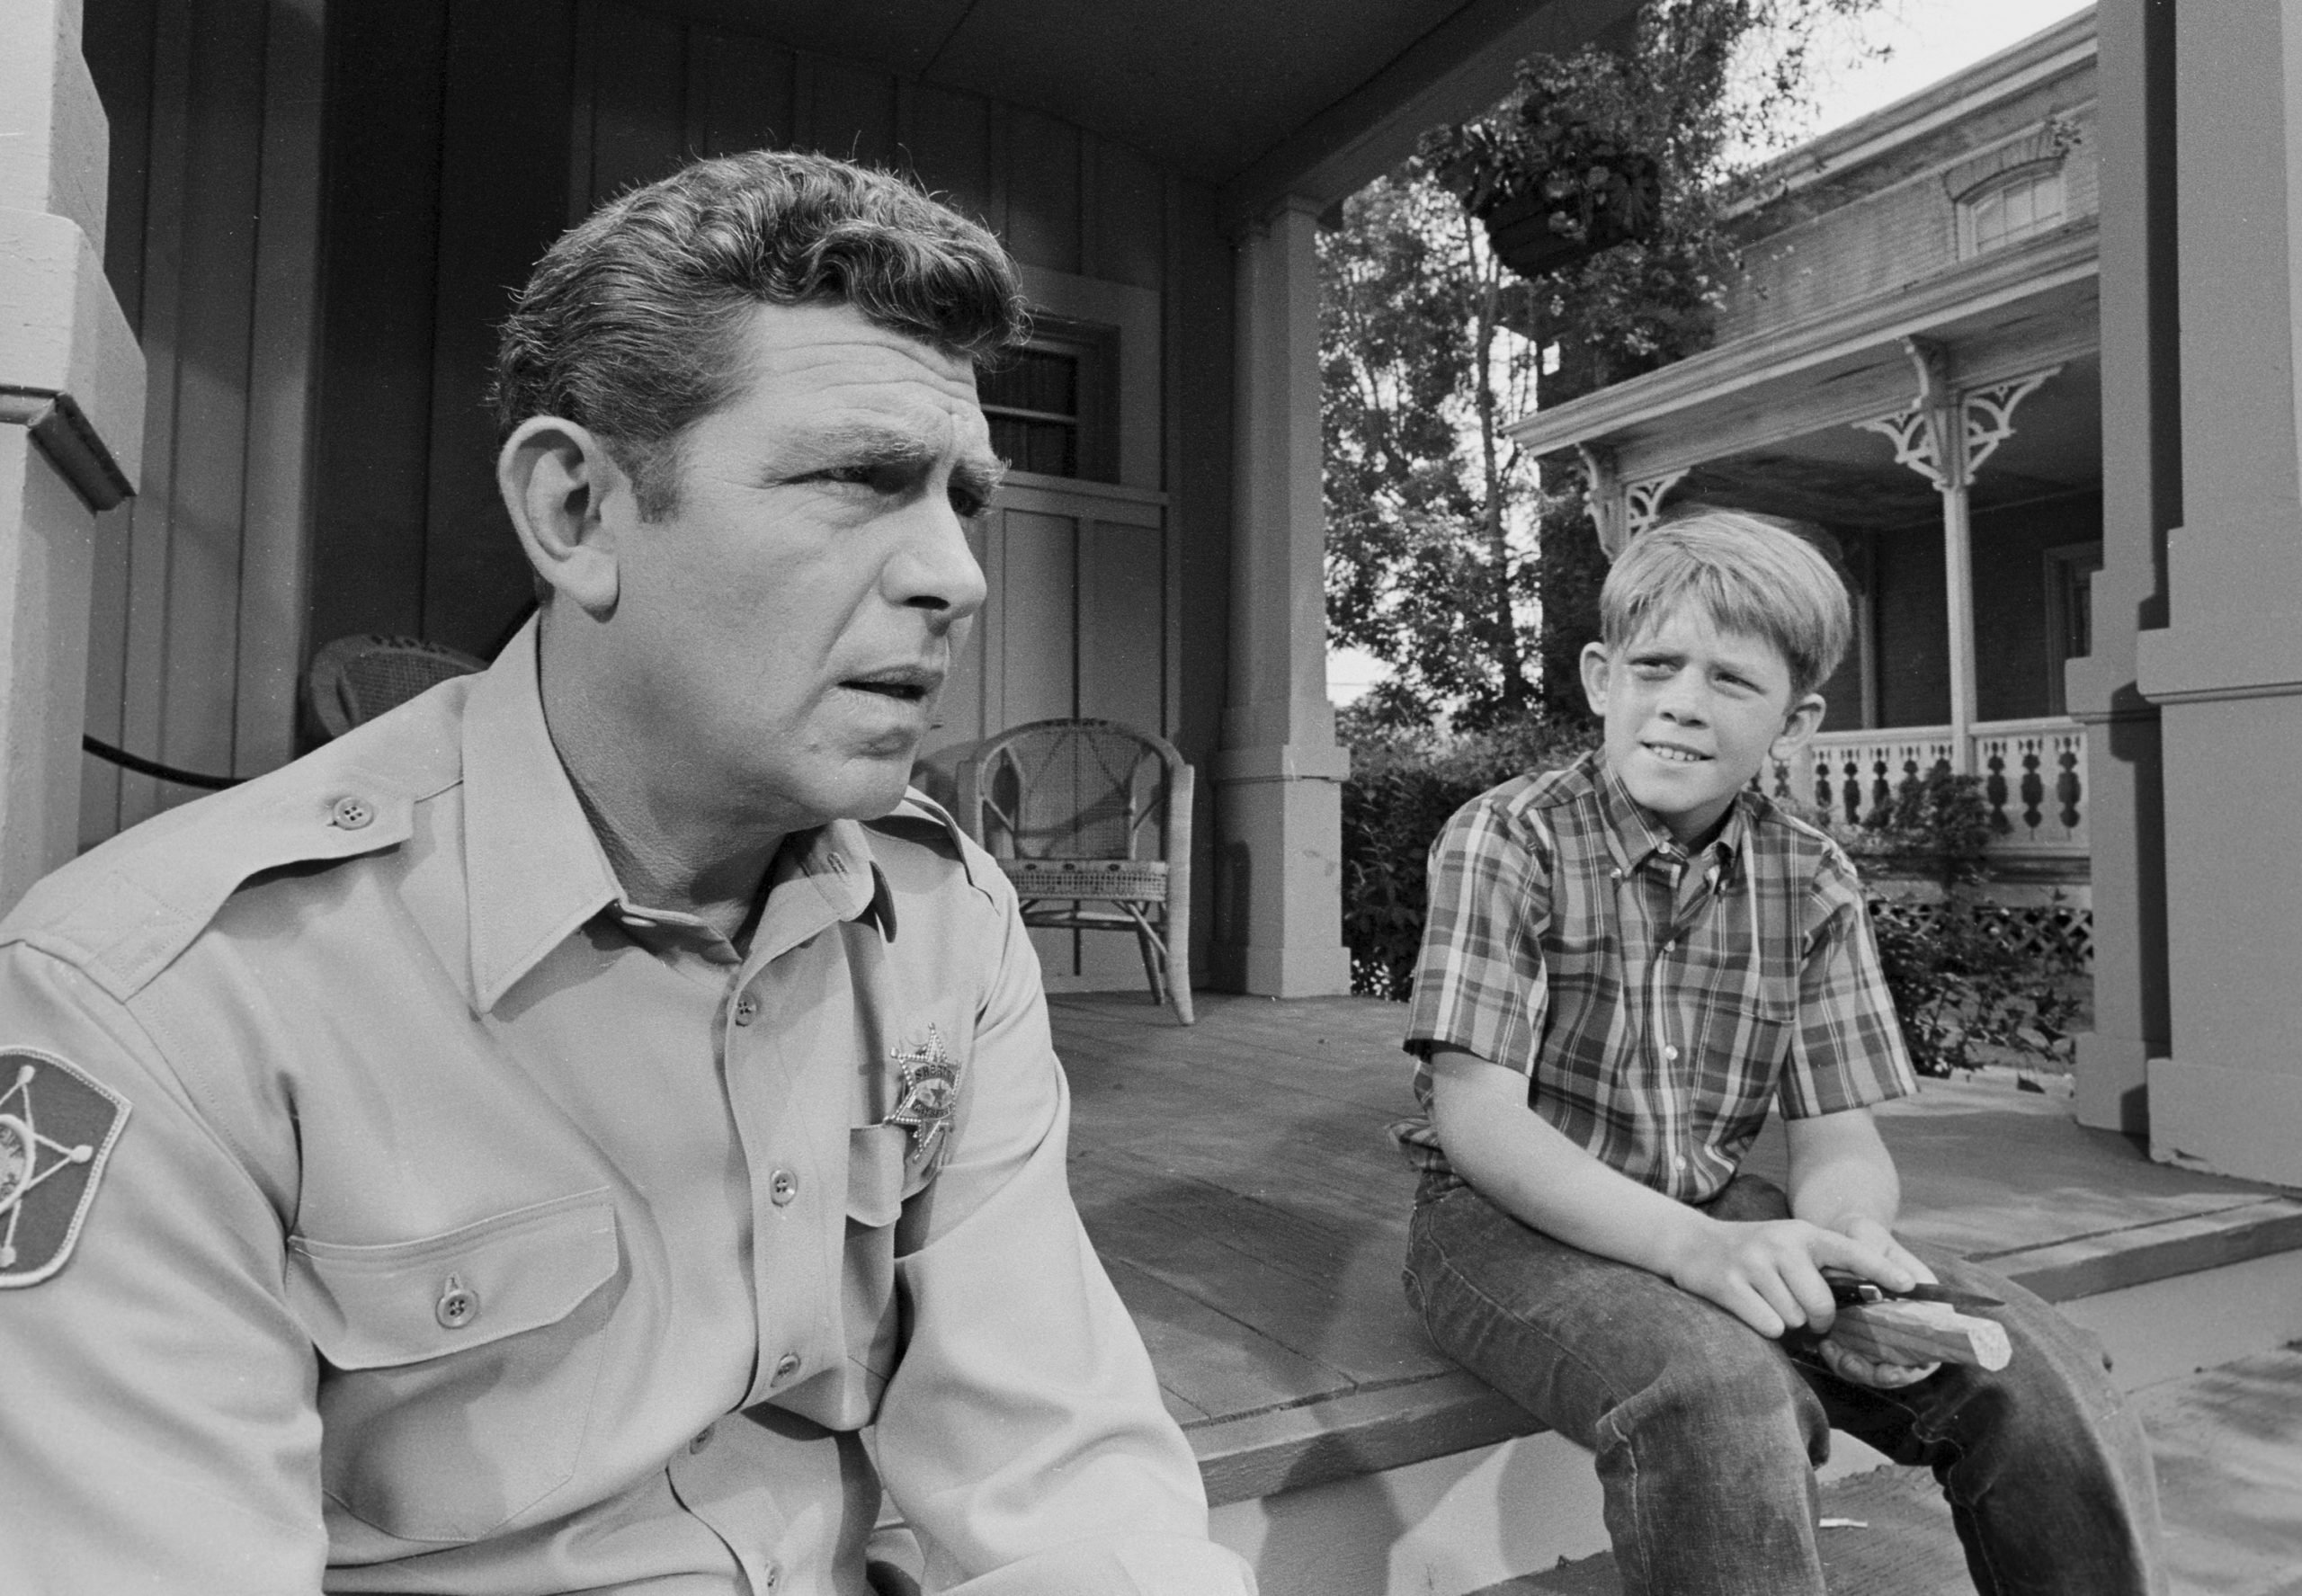 ‘The Andy Griffith Show’: Despite Andy’s Rumored Temper, Ron Howard Says Show Environment Brought ‘Sense of Joy’